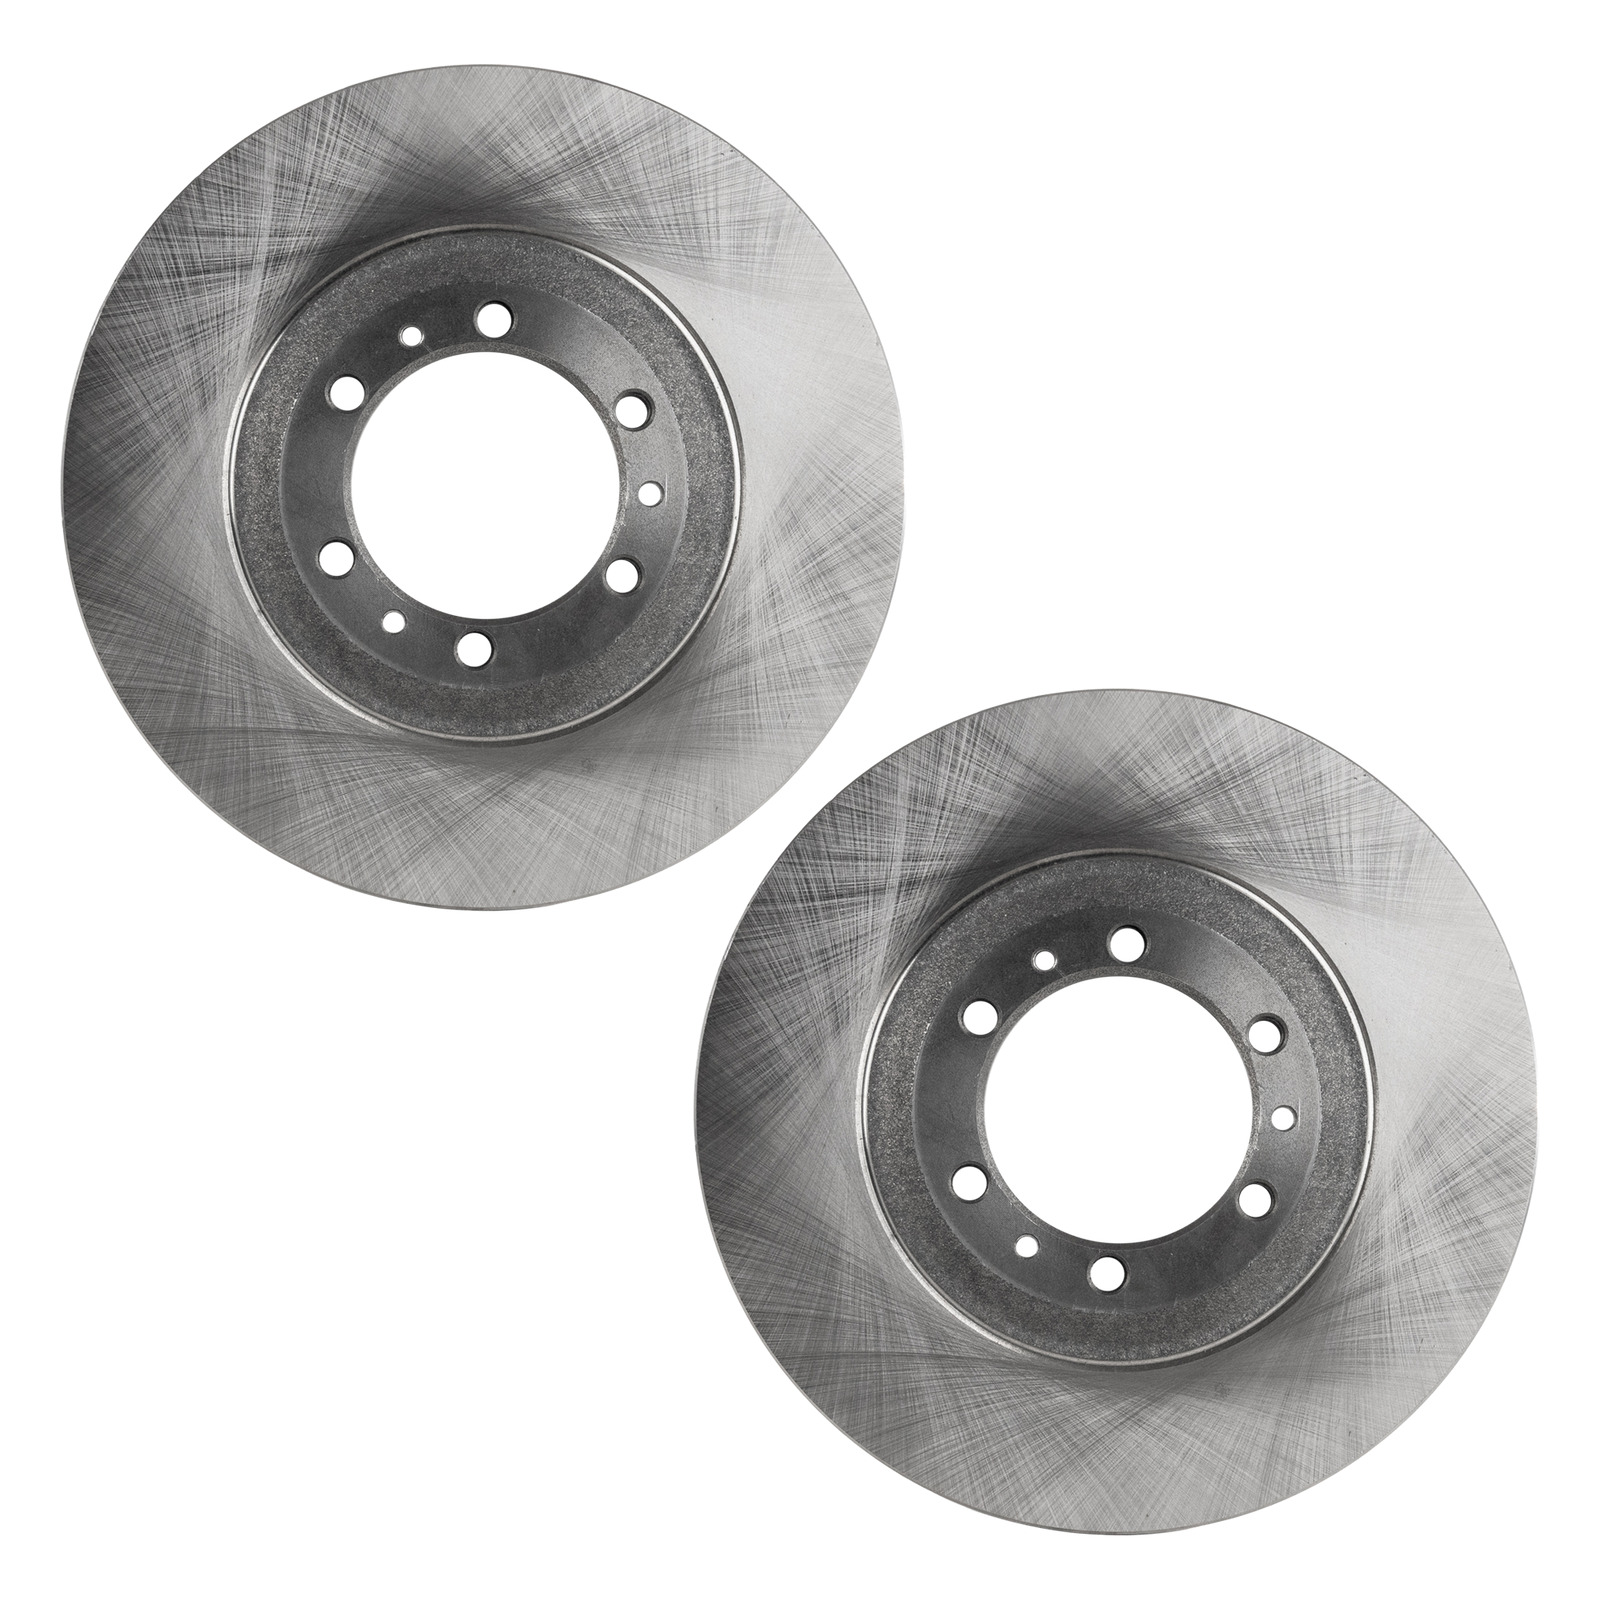 Front Disc Brake Rotors For 1994-2001 Isuzu Rodeo Production Date To June 2001